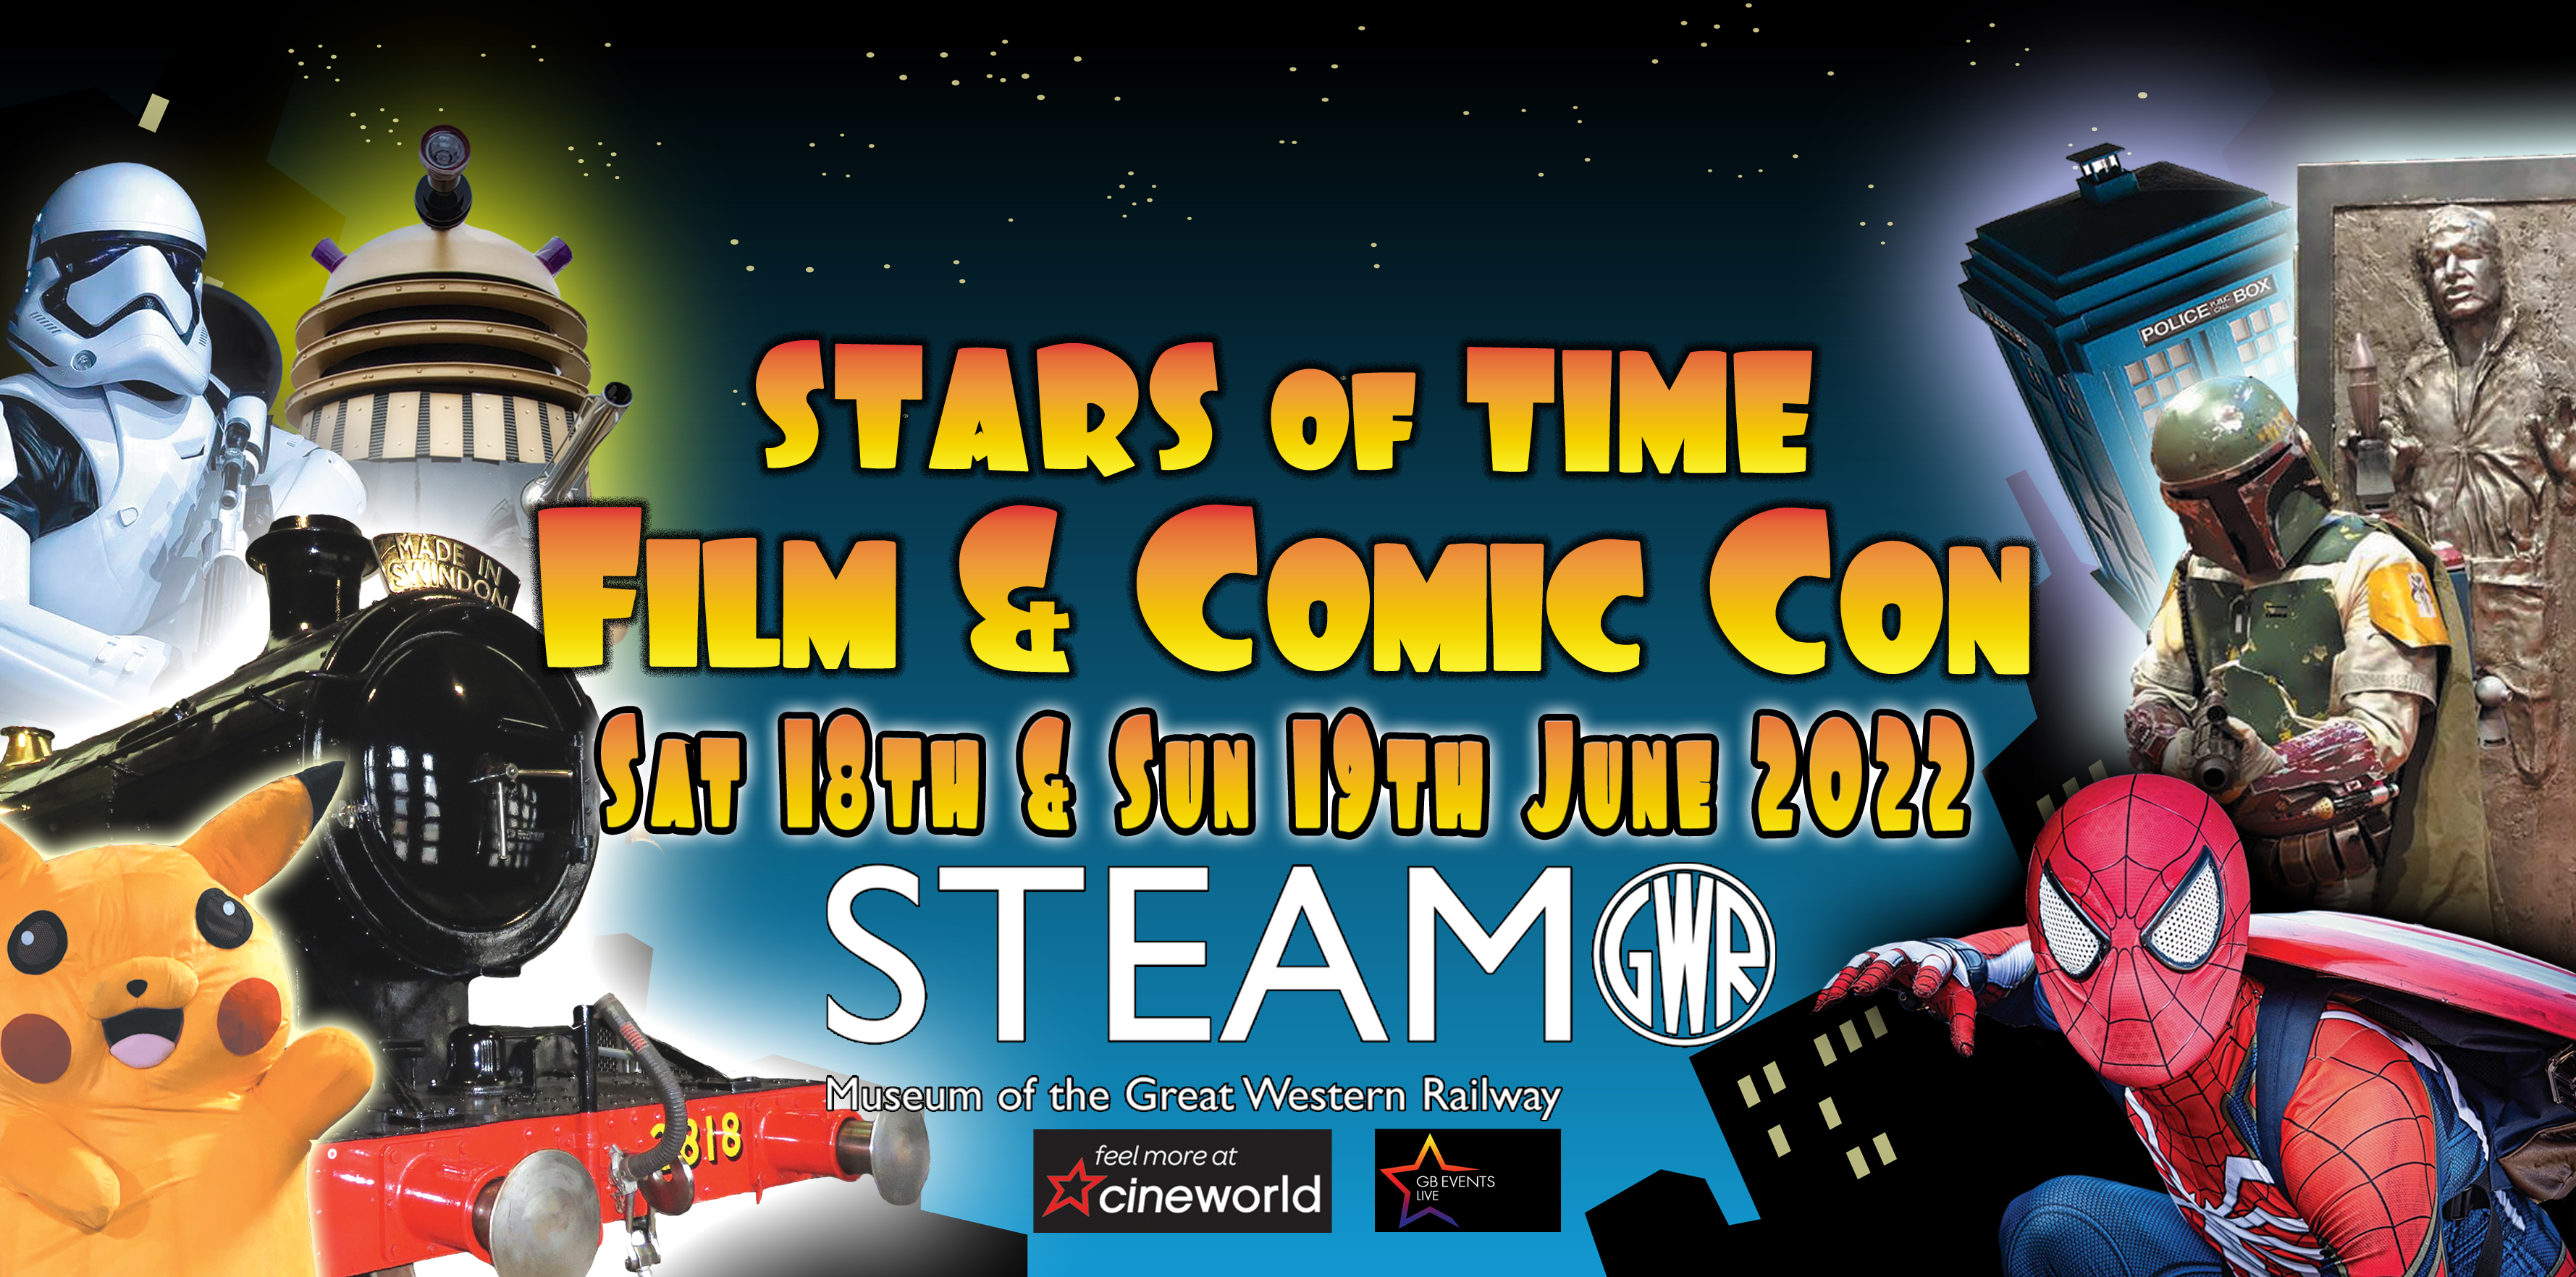 New Comic Con to materialise at Swindon’s STEAM Museum this summer